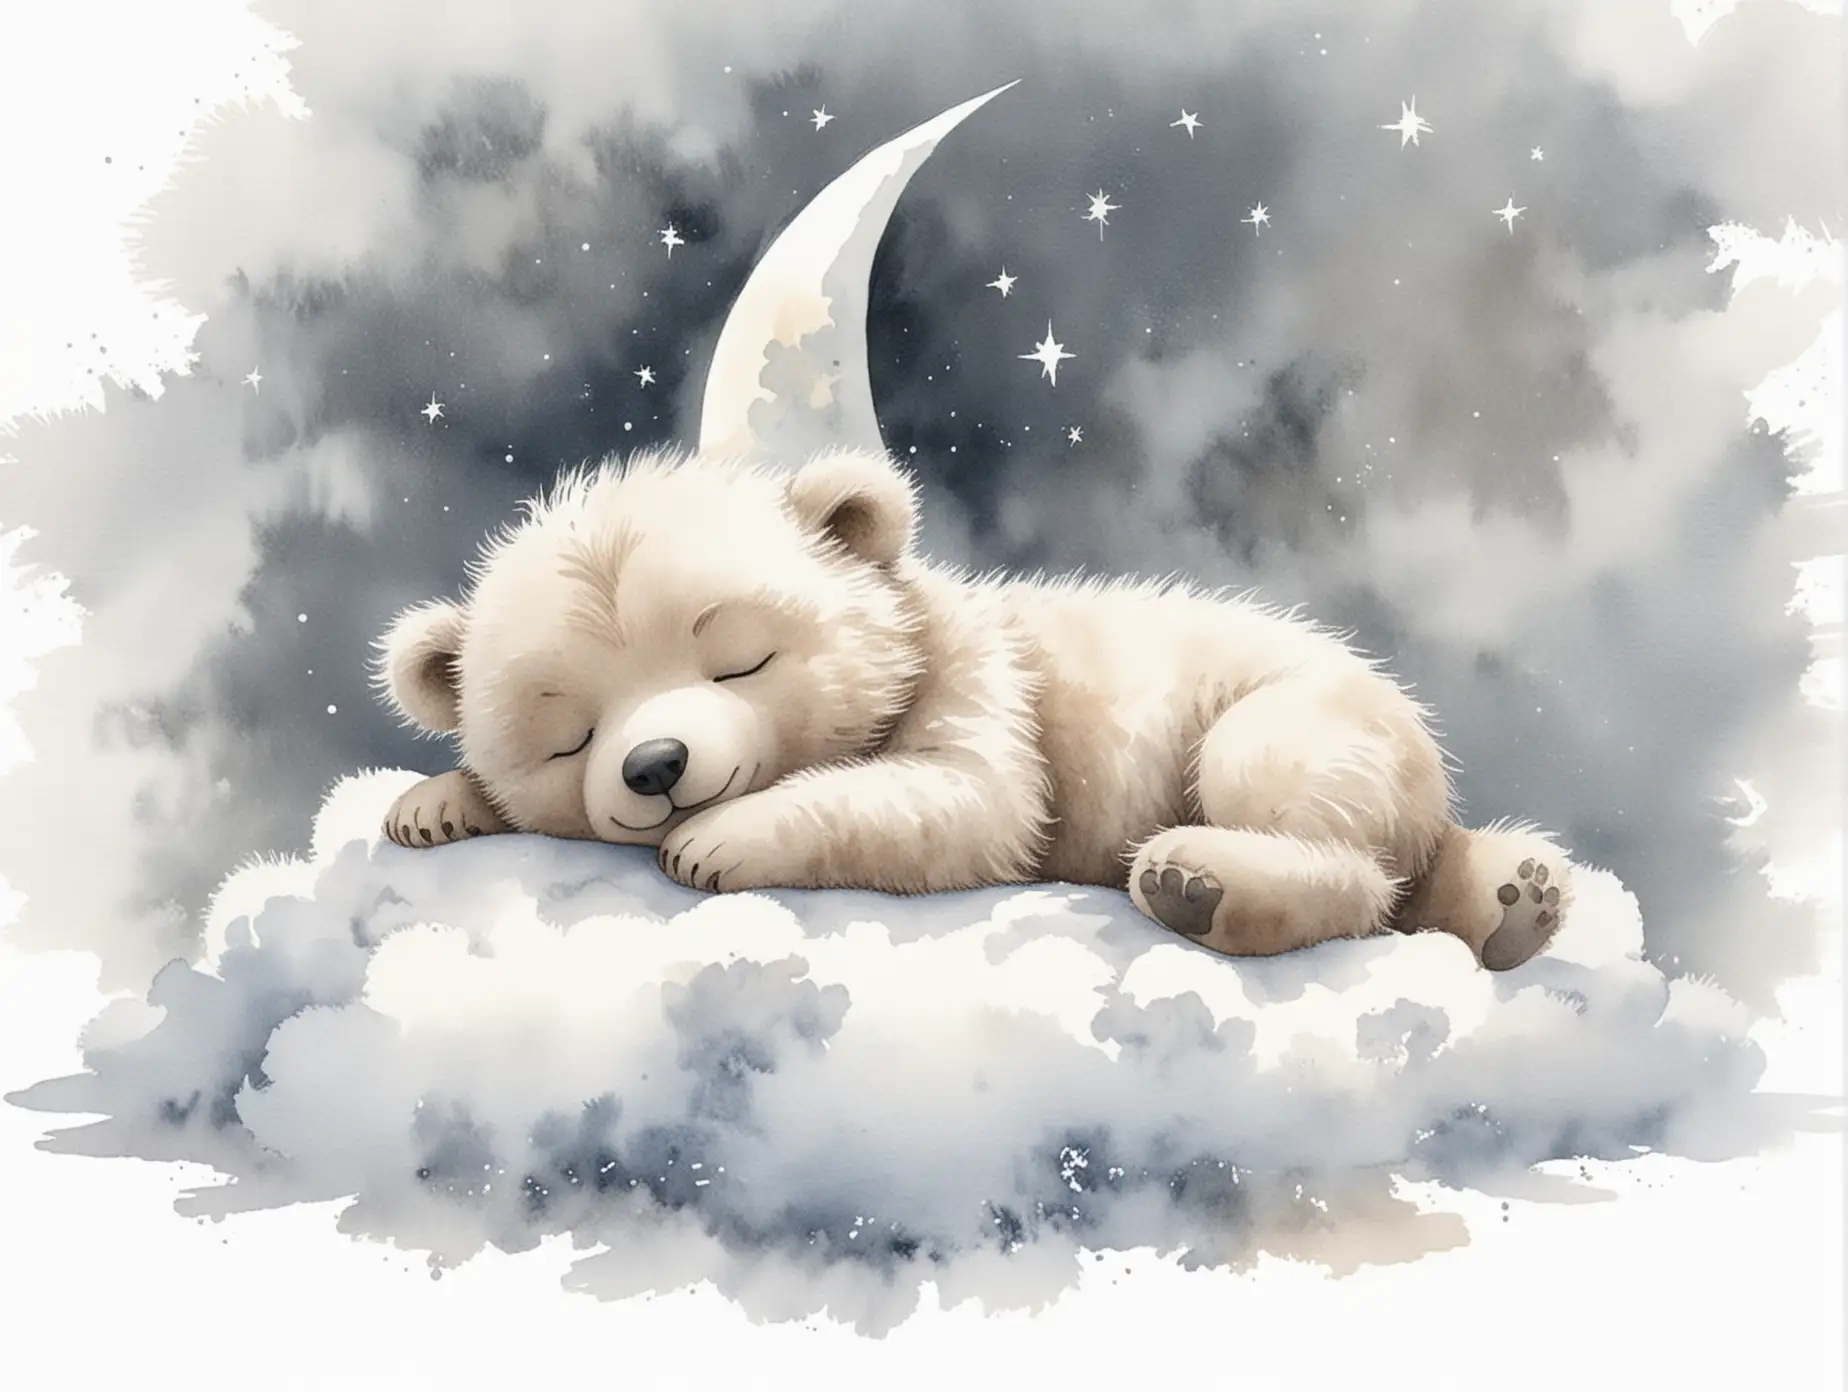 Cute Baby Teddy Bear Asleep on Crescent Moon in Watercolor Childrens Book Illustration